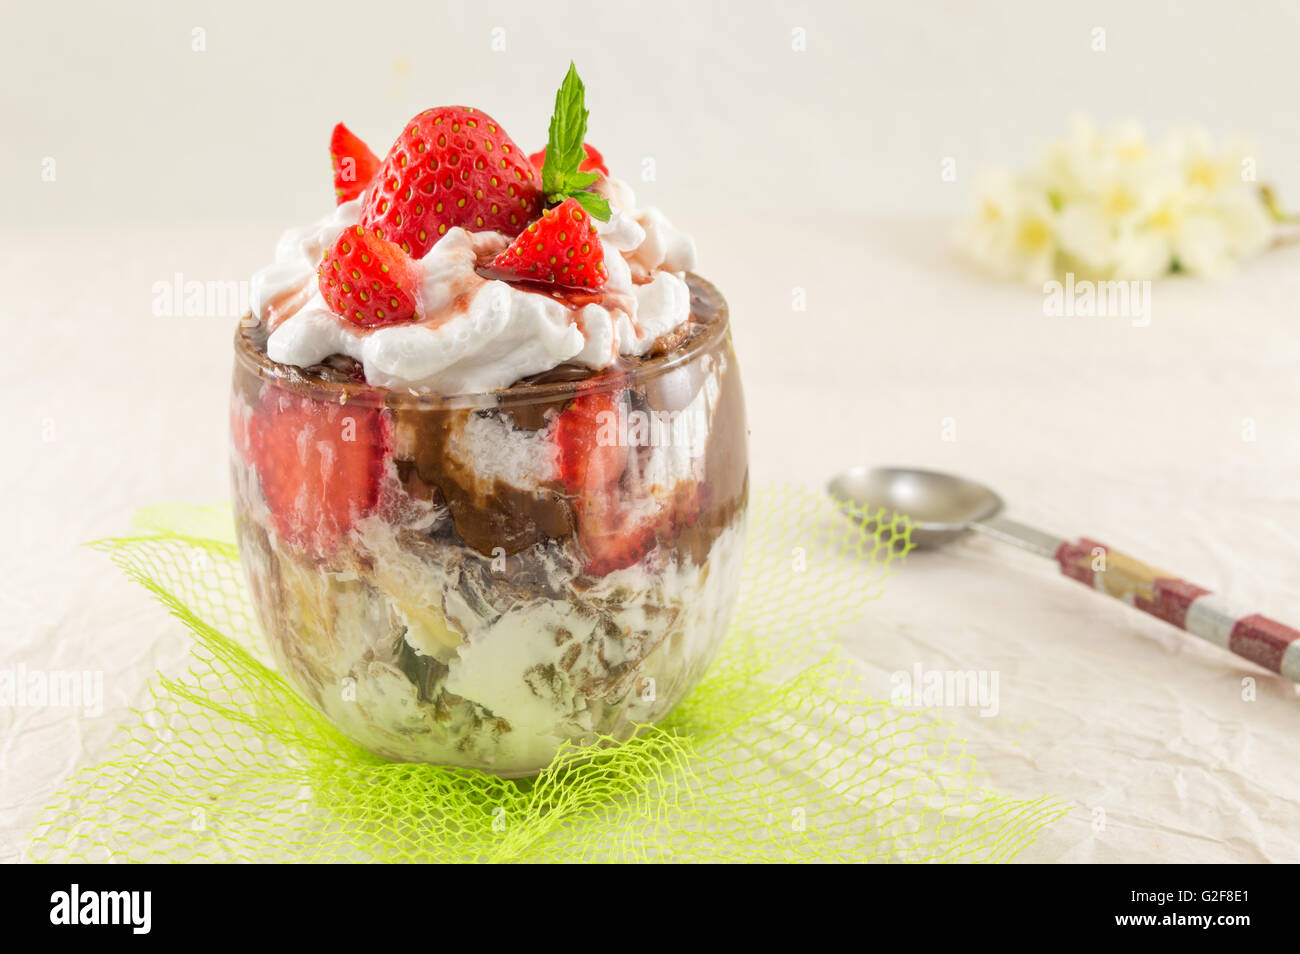 Strawberry parfait in a glass and fresh strawberries Stock Photo